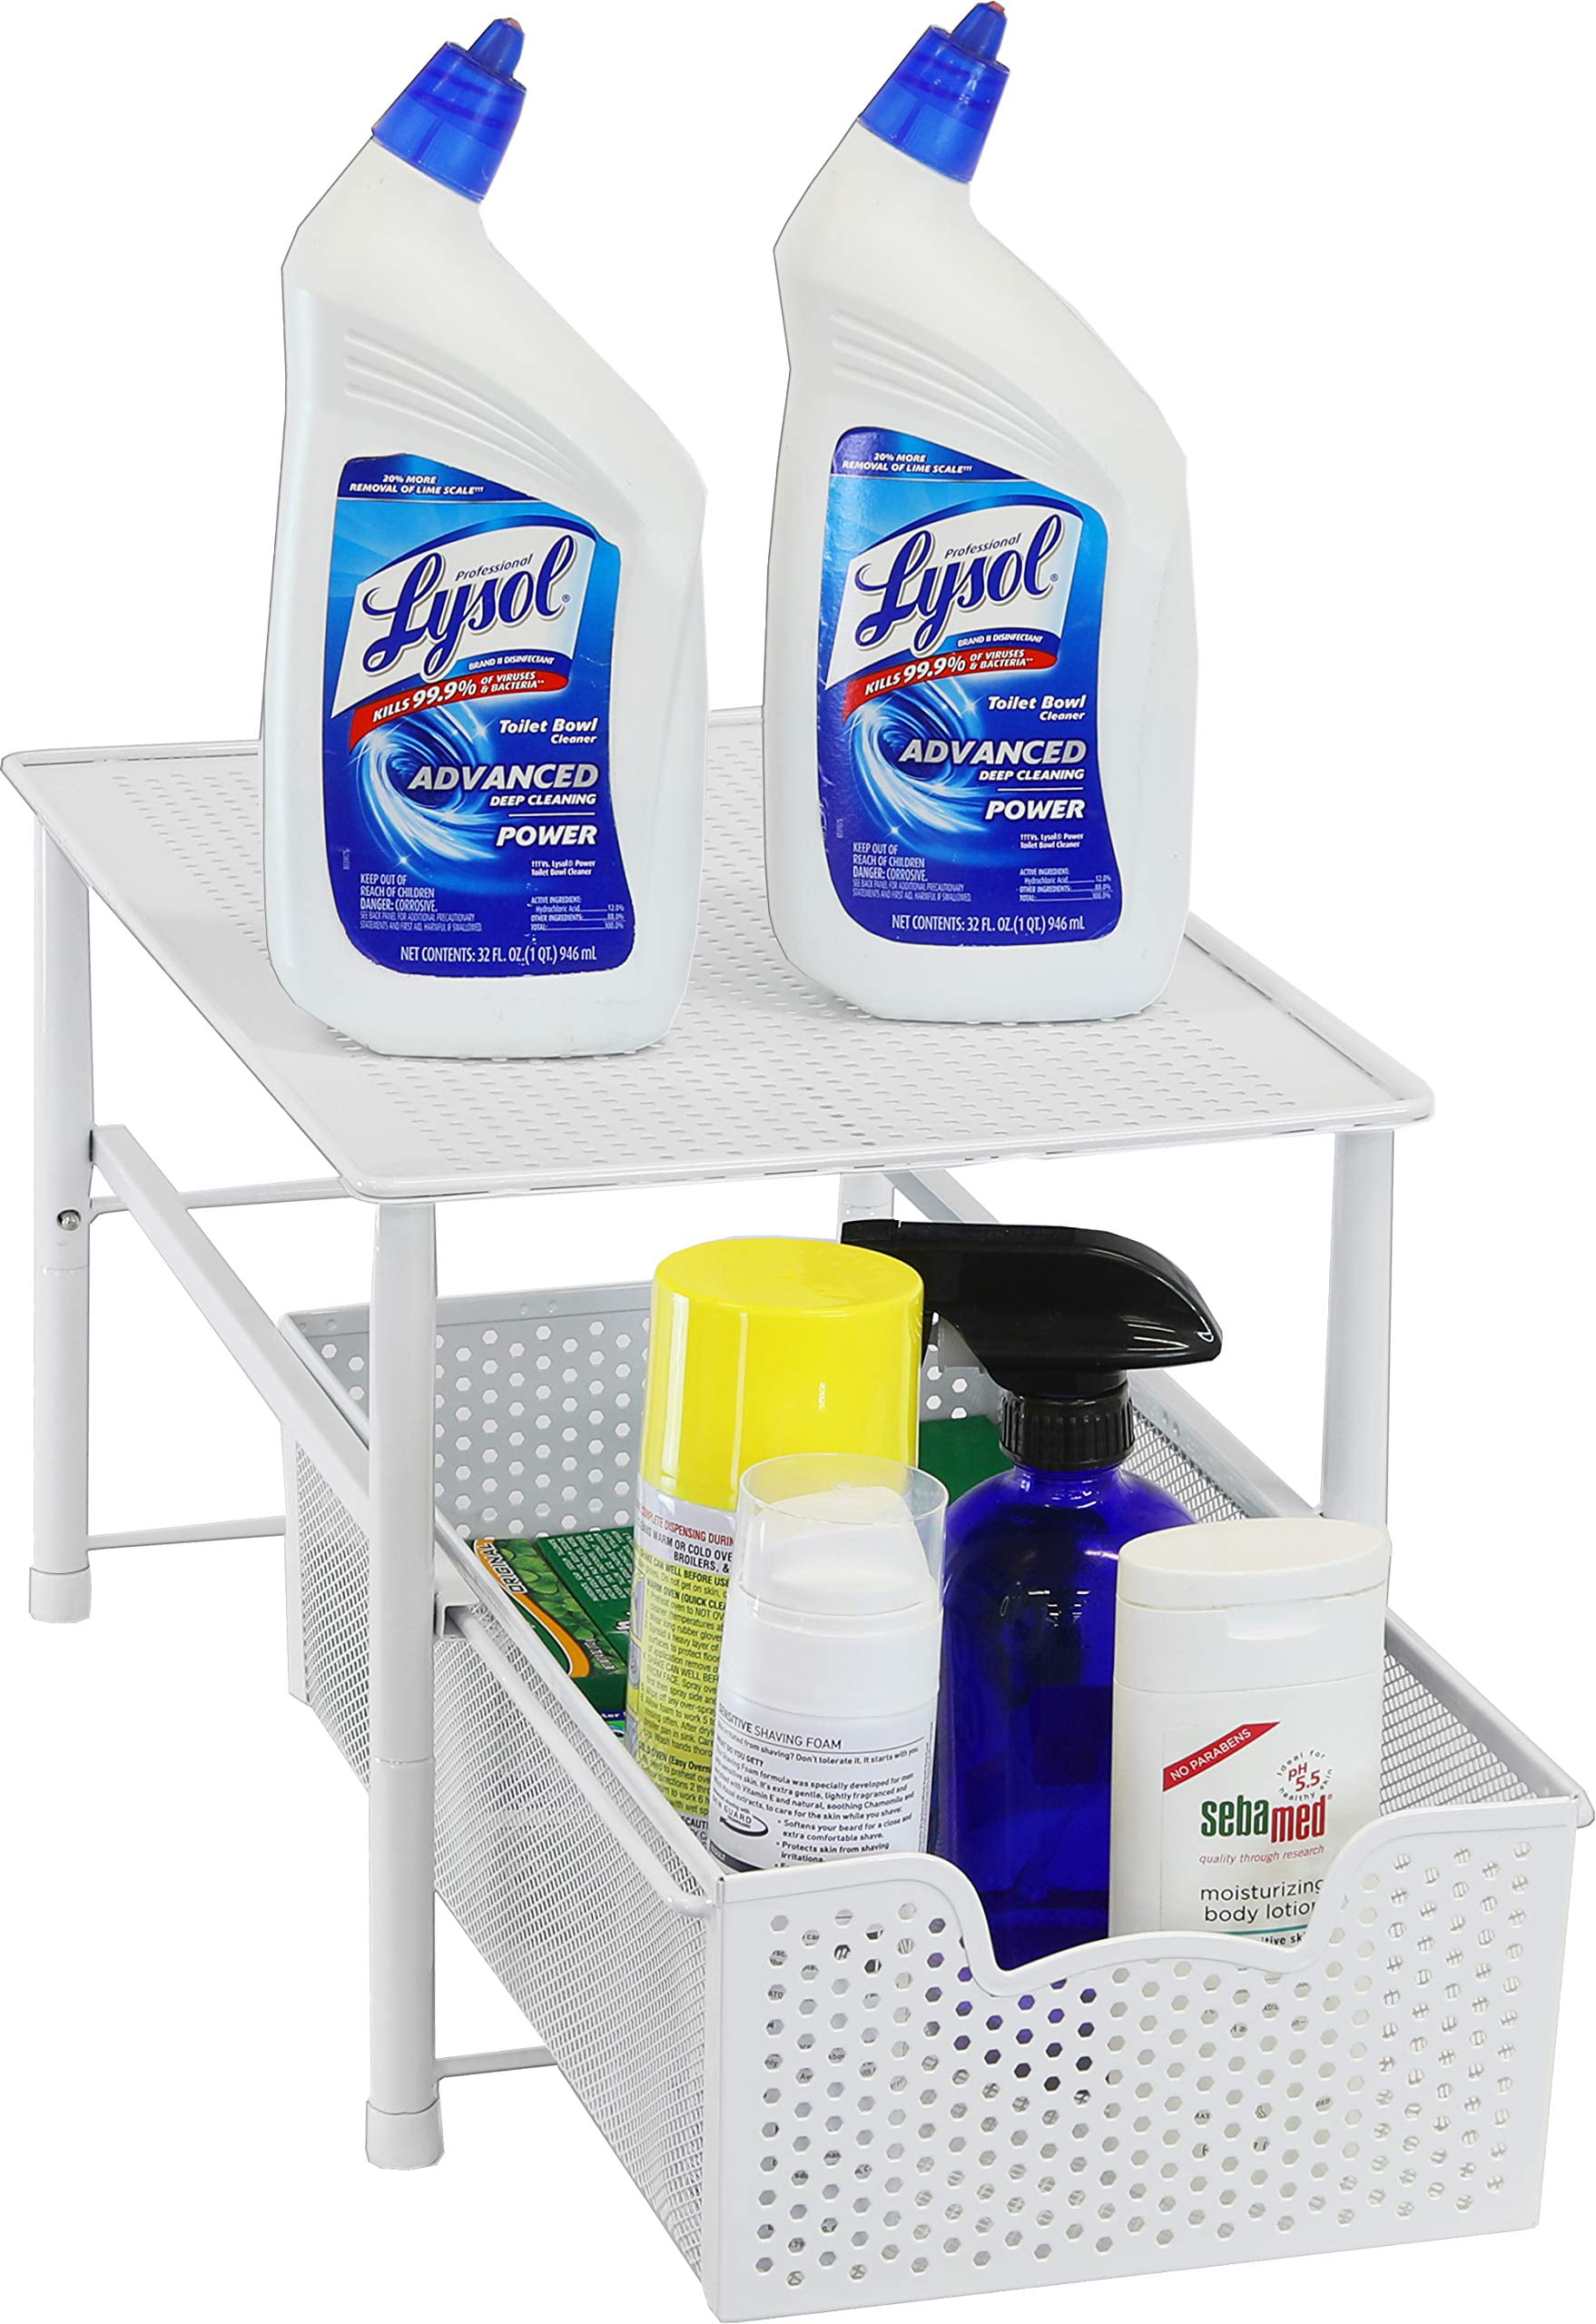 Dropship 2-Tier Under Sink Organizer, Sliding Storage Drawer Basket  Organizer With Hooks, Hanging Cup, ABS Material to Sell Online at a Lower  Price